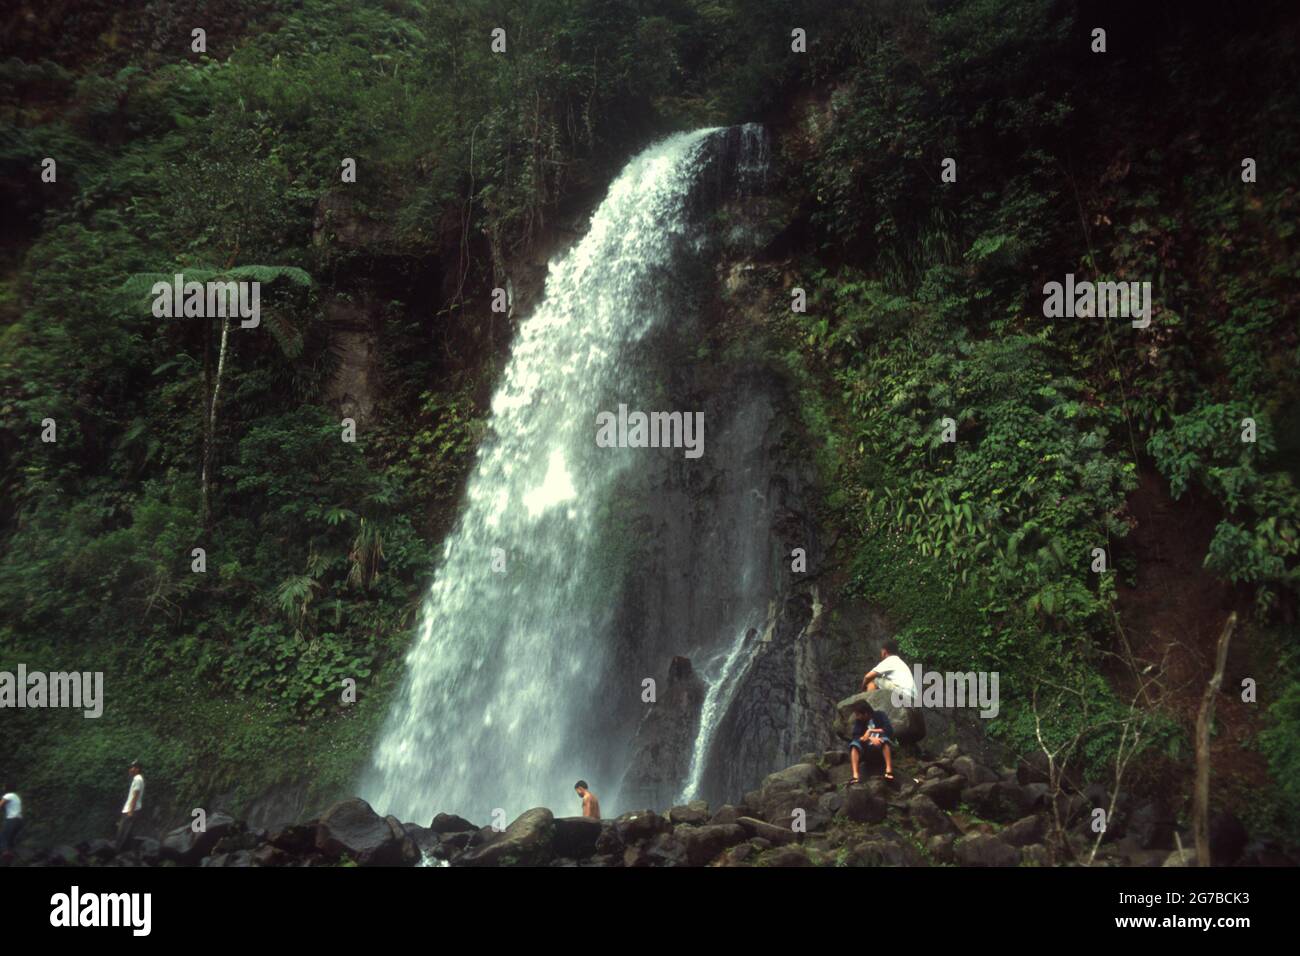 People having a recreational time at Cibeureum waterfall in Mount Gede Pangrango National Park, West Java, Indonesia. Stock Photo